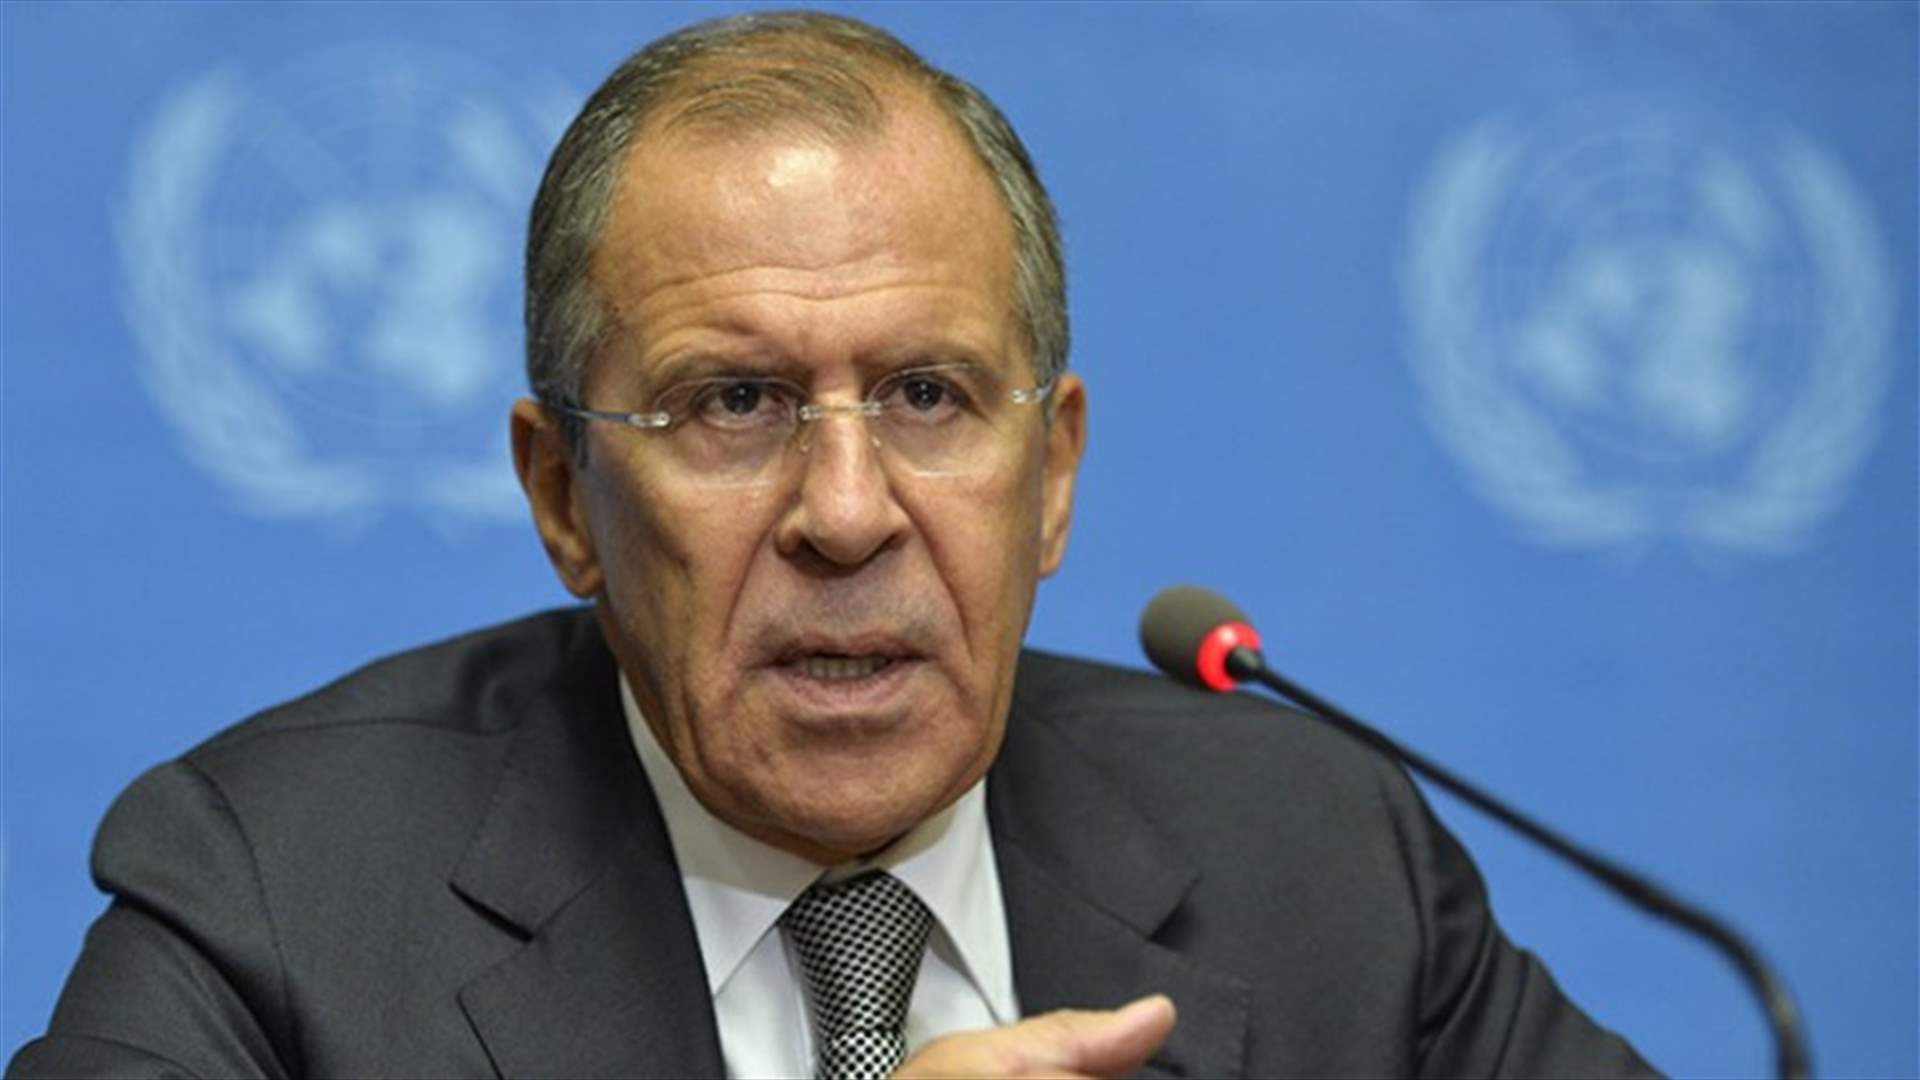 Russia says West not coping with obligations on Syria